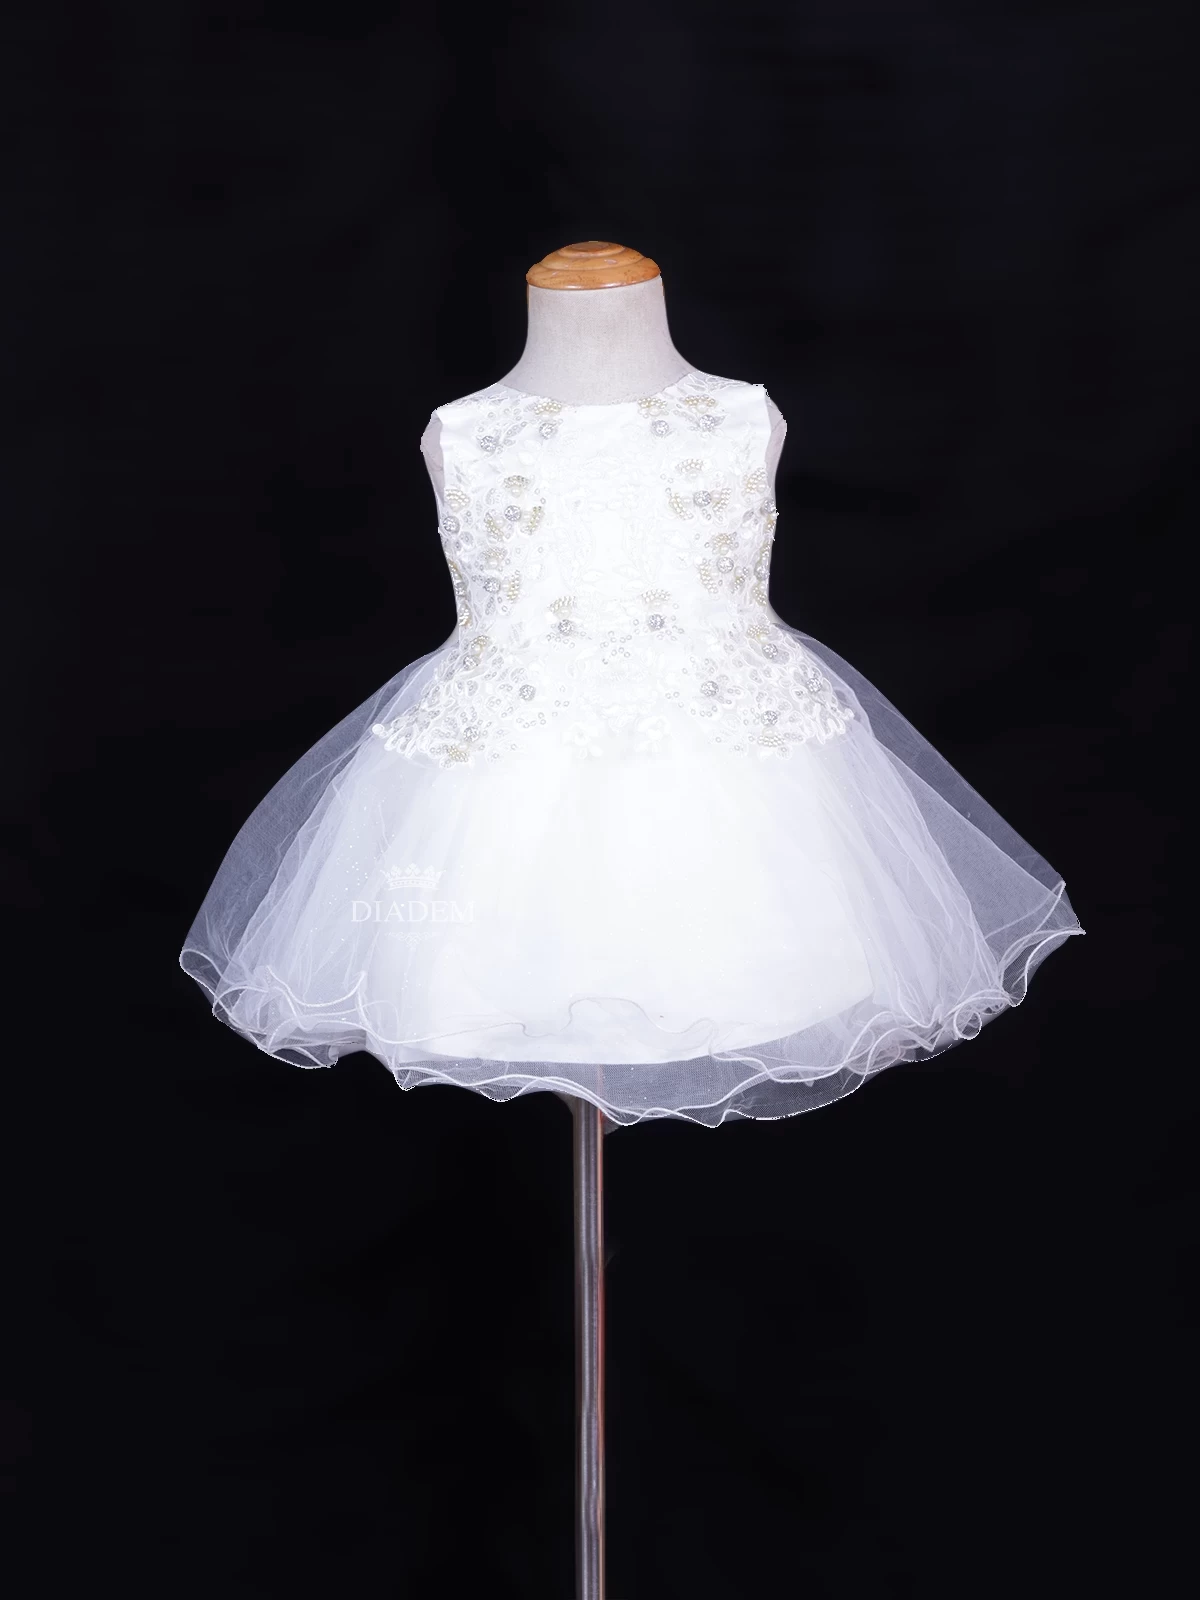 White Net Frock Adorned With Floral Laces And Pearl Beads